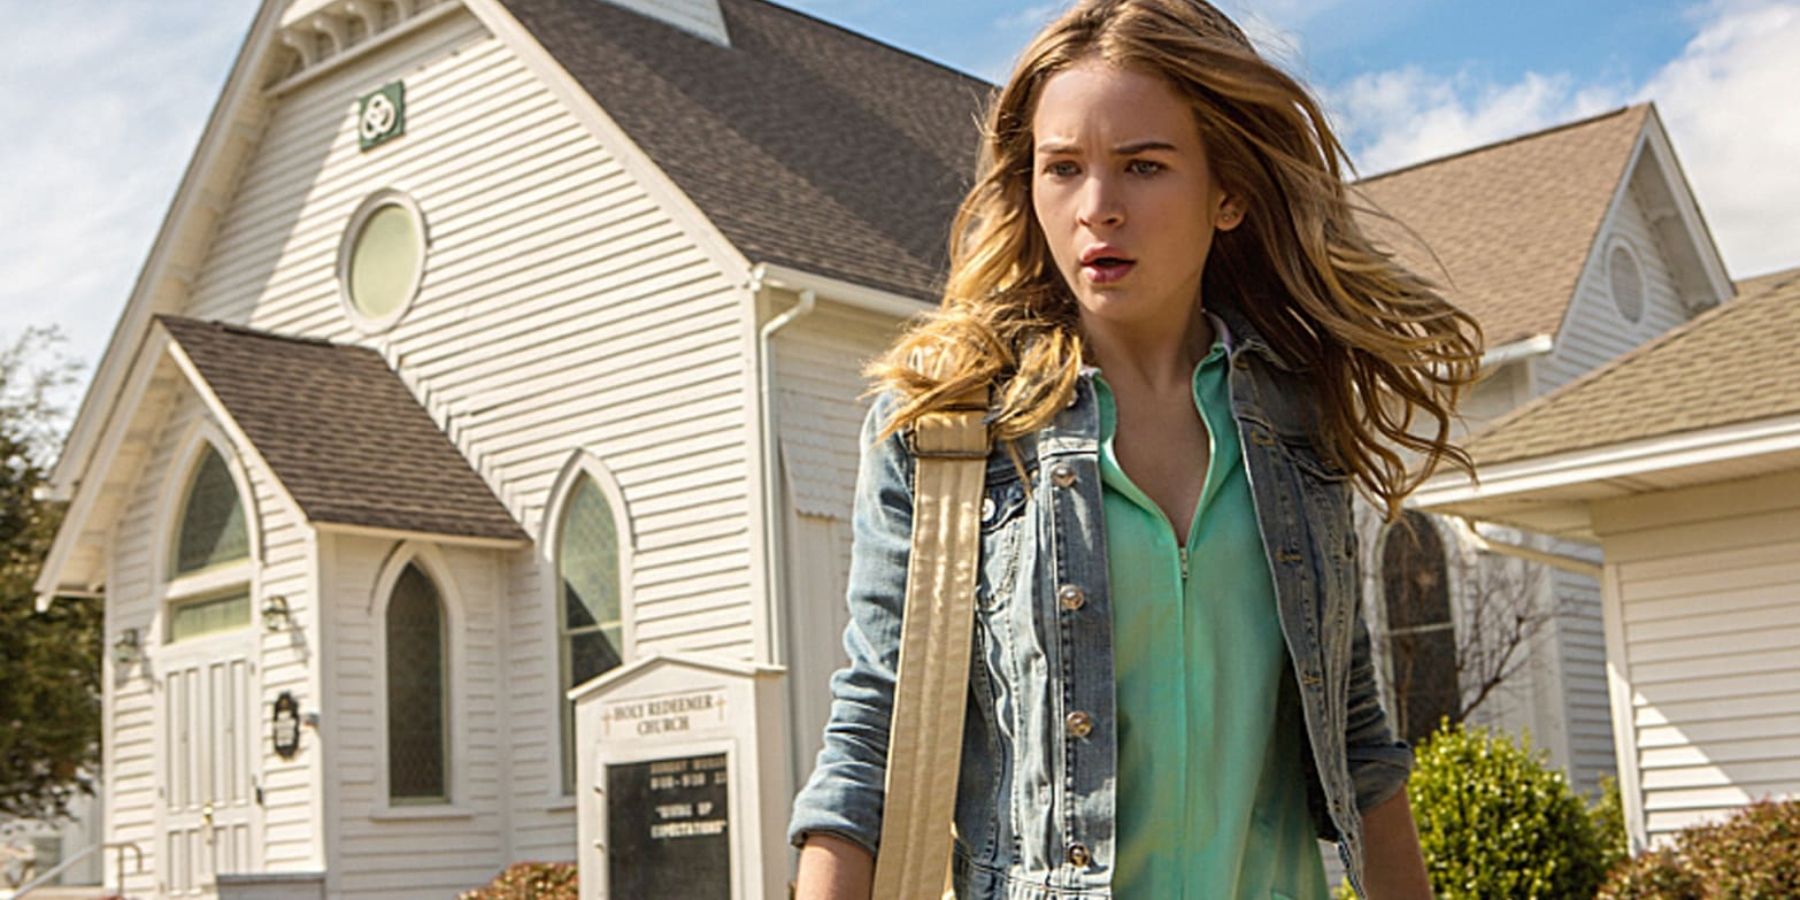 Britt Robertson as Angie McAlister in Under The Dome